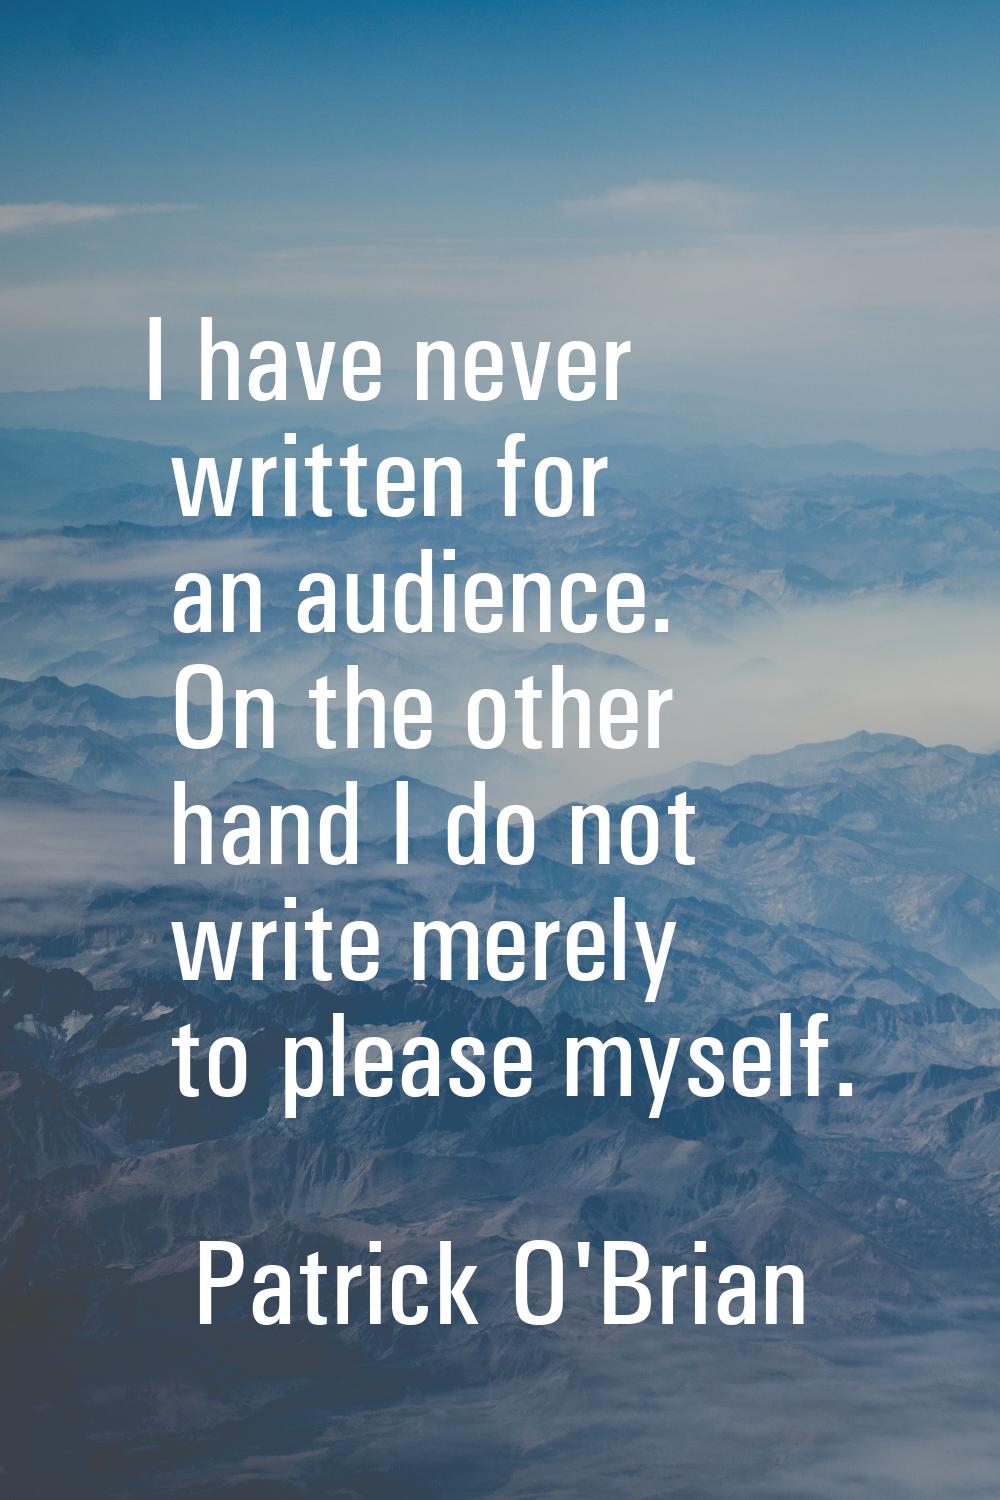 I have never written for an audience. On the other hand I do not write merely to please myself.